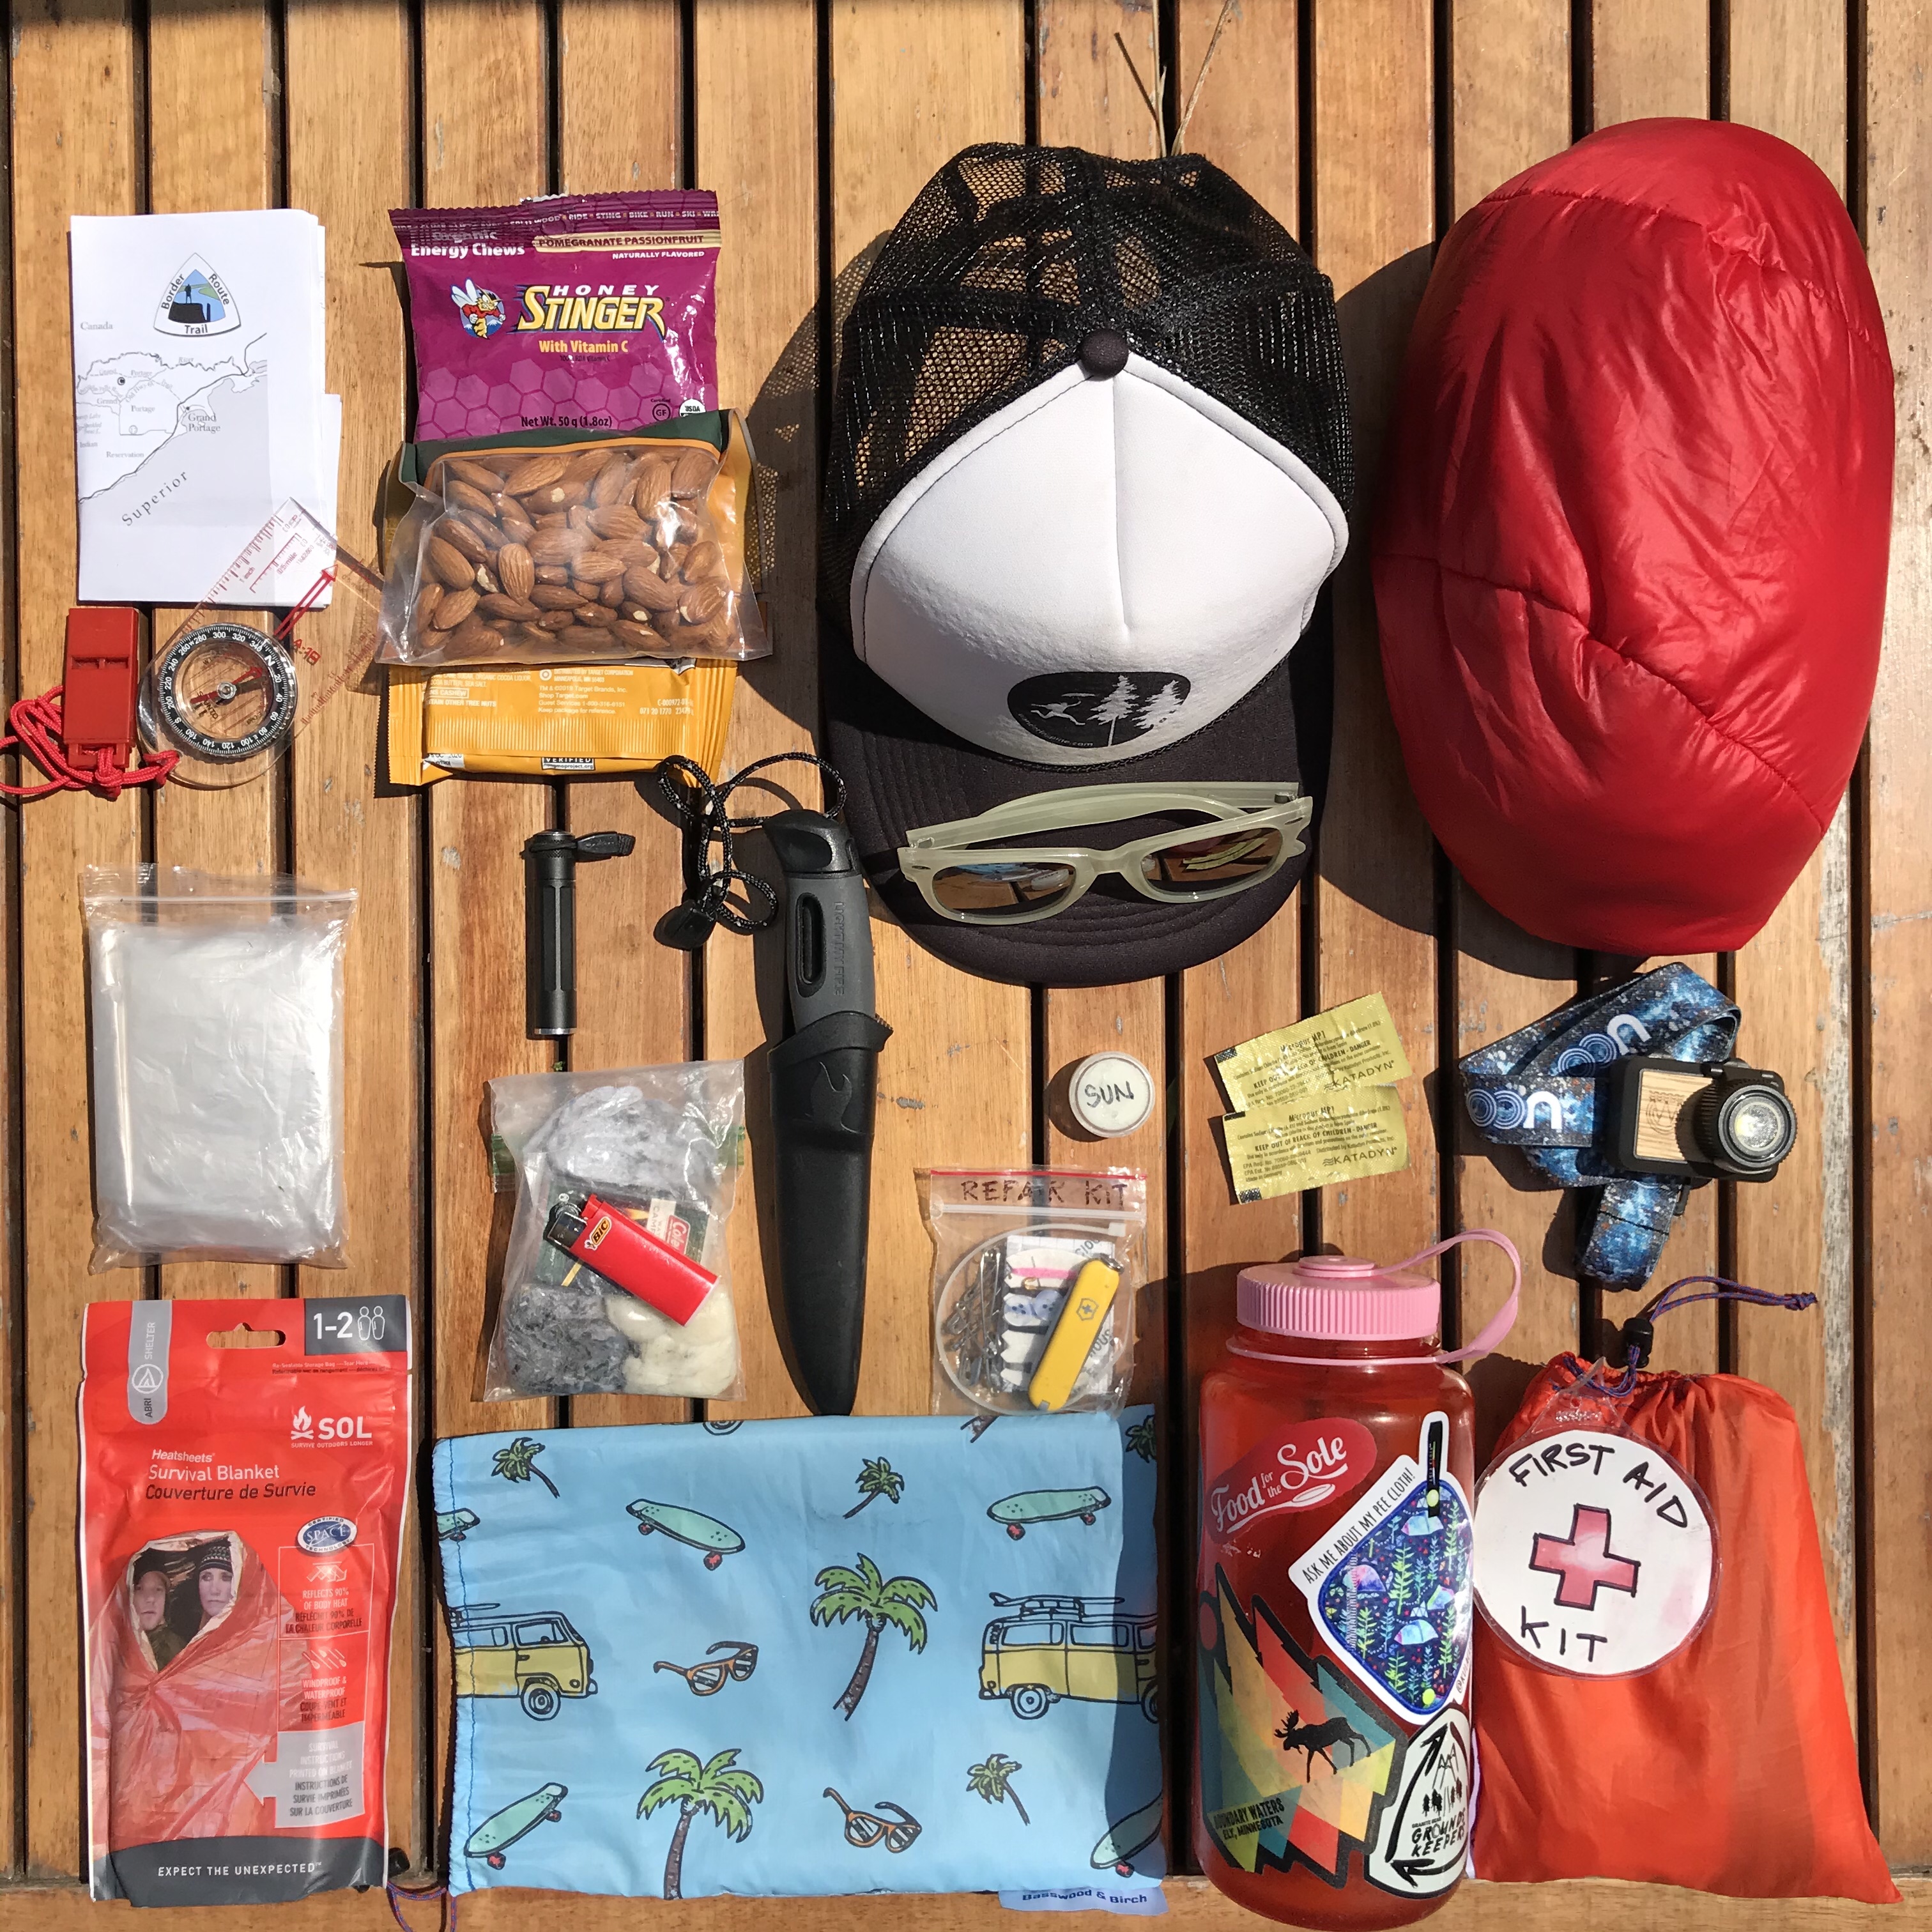 Ten Essentials: Top Gear For Hiking, Backpacking, Camping, And More